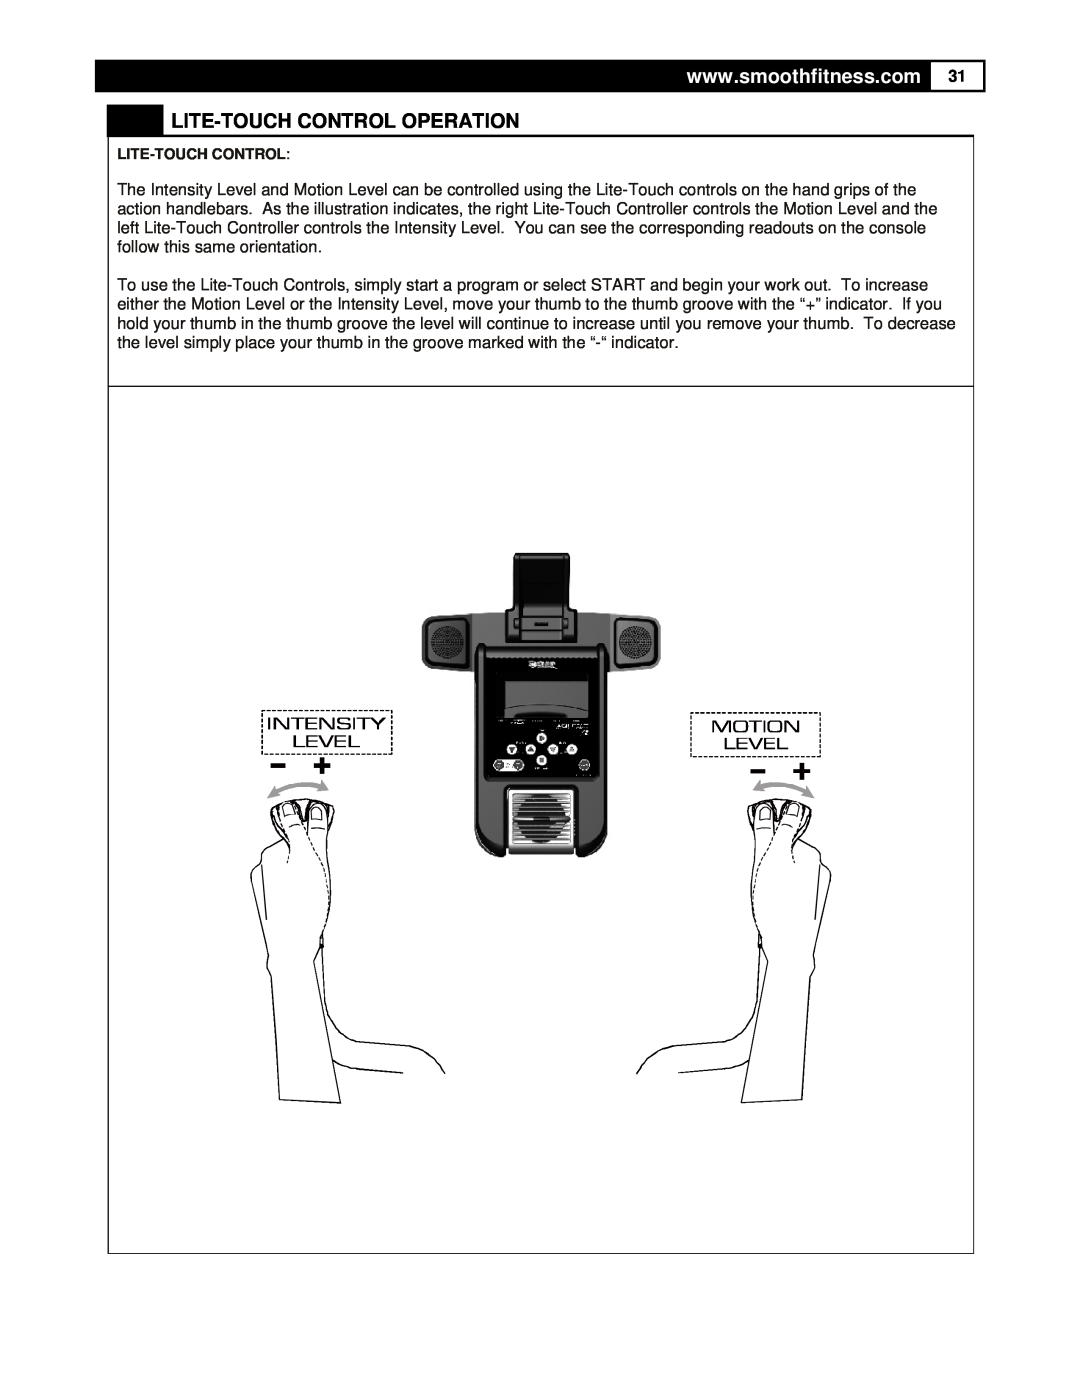 Smooth Fitness DMT X2 user manual Lite-Touch Control Operation 